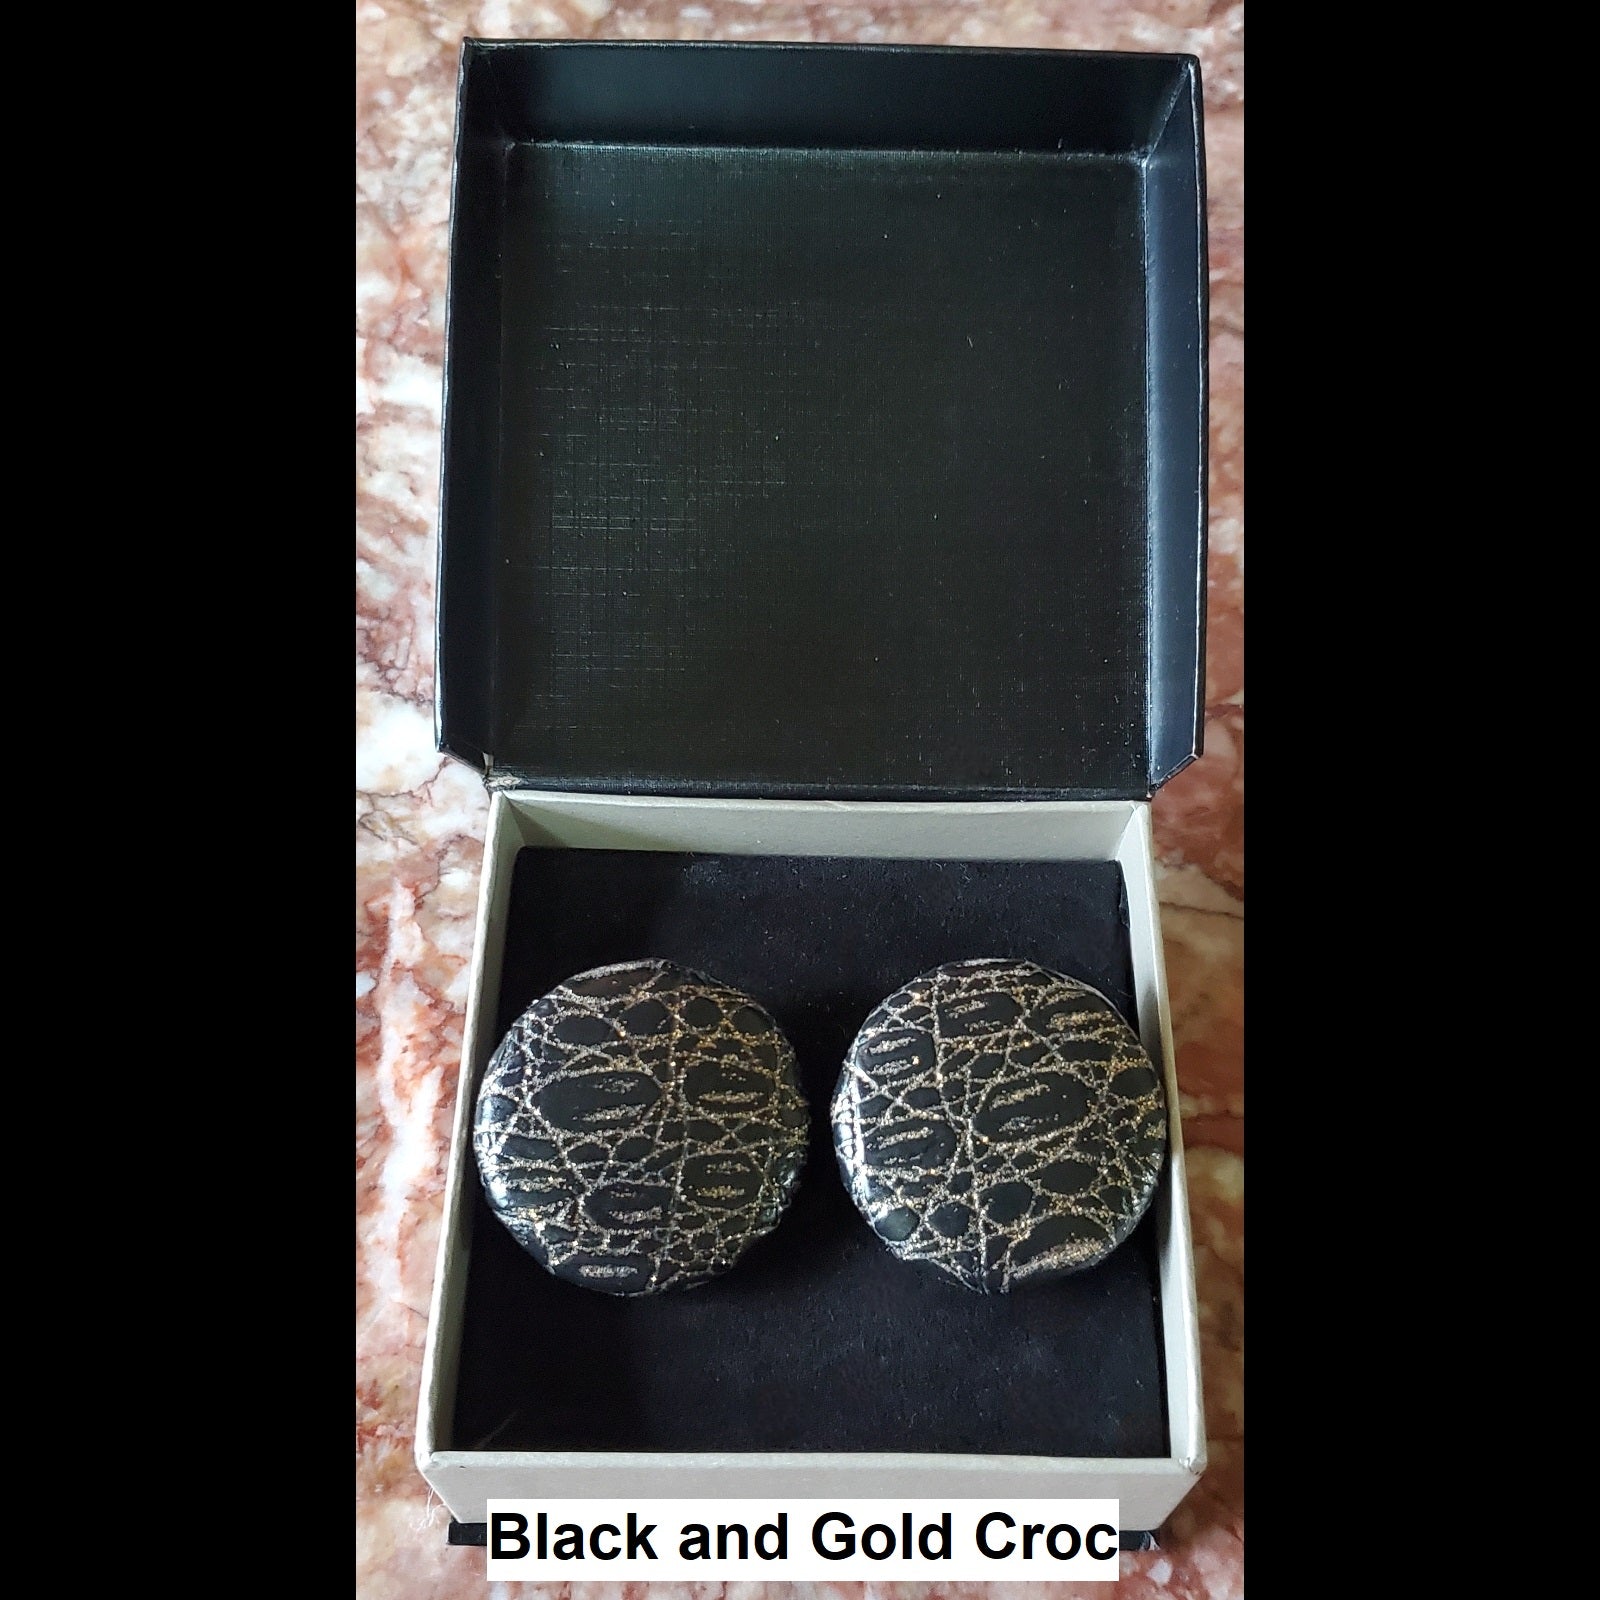 Black and Gold Croc print button earrings in jewelry box